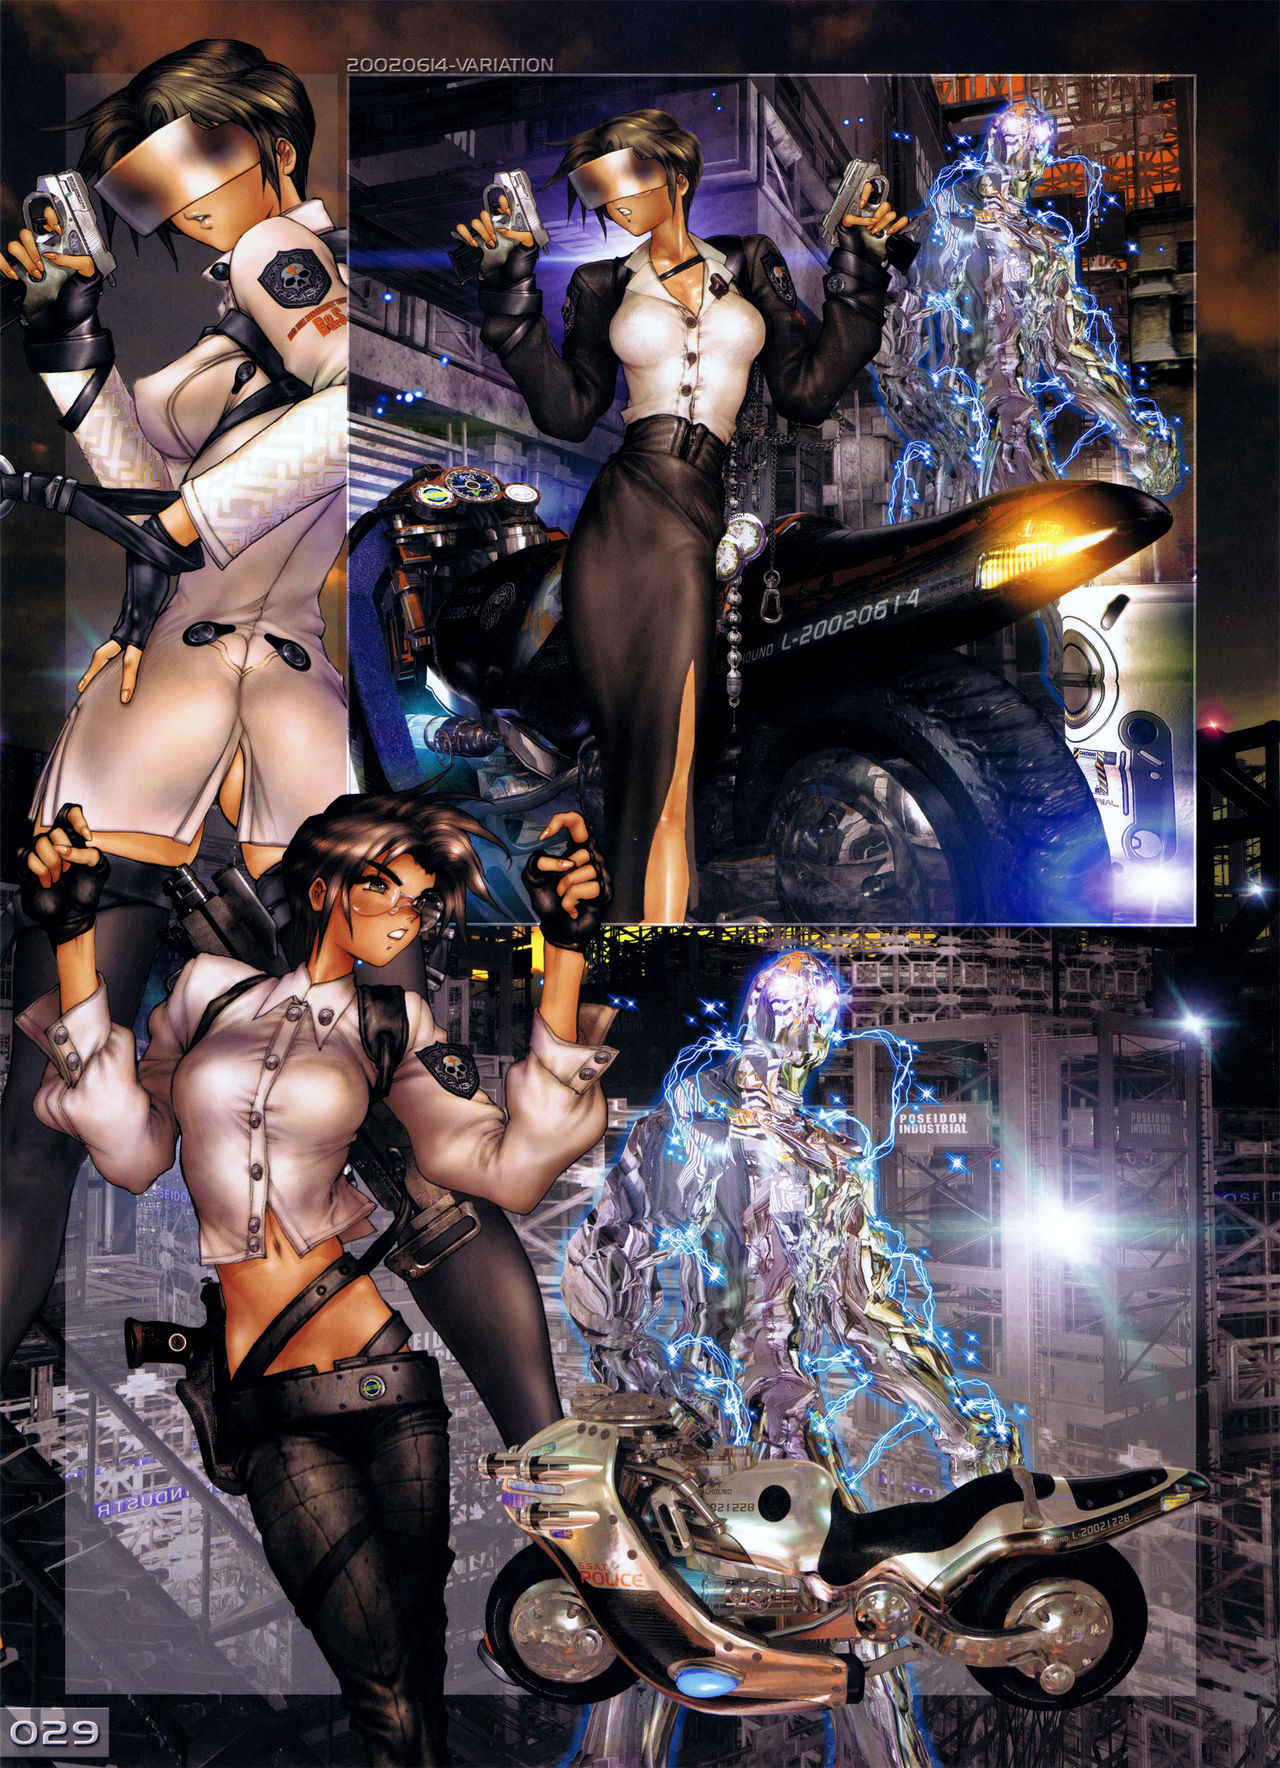 [Masamune Shirow] W Tails Cat 2 [士郎正宗] W・TAILS CAT 2